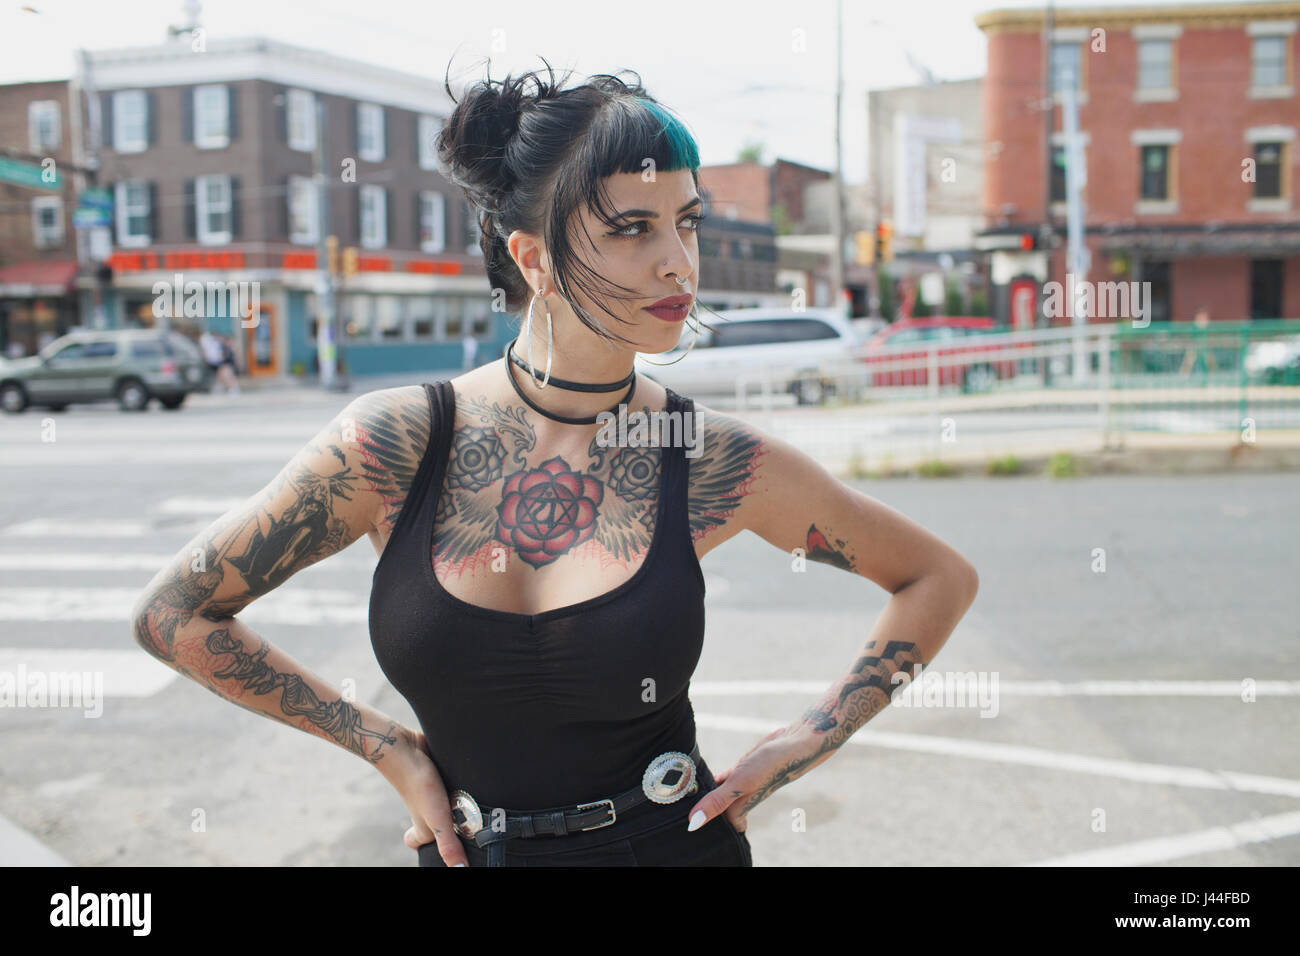 A portrait of a young woman with black and blue hair. Stock Photo